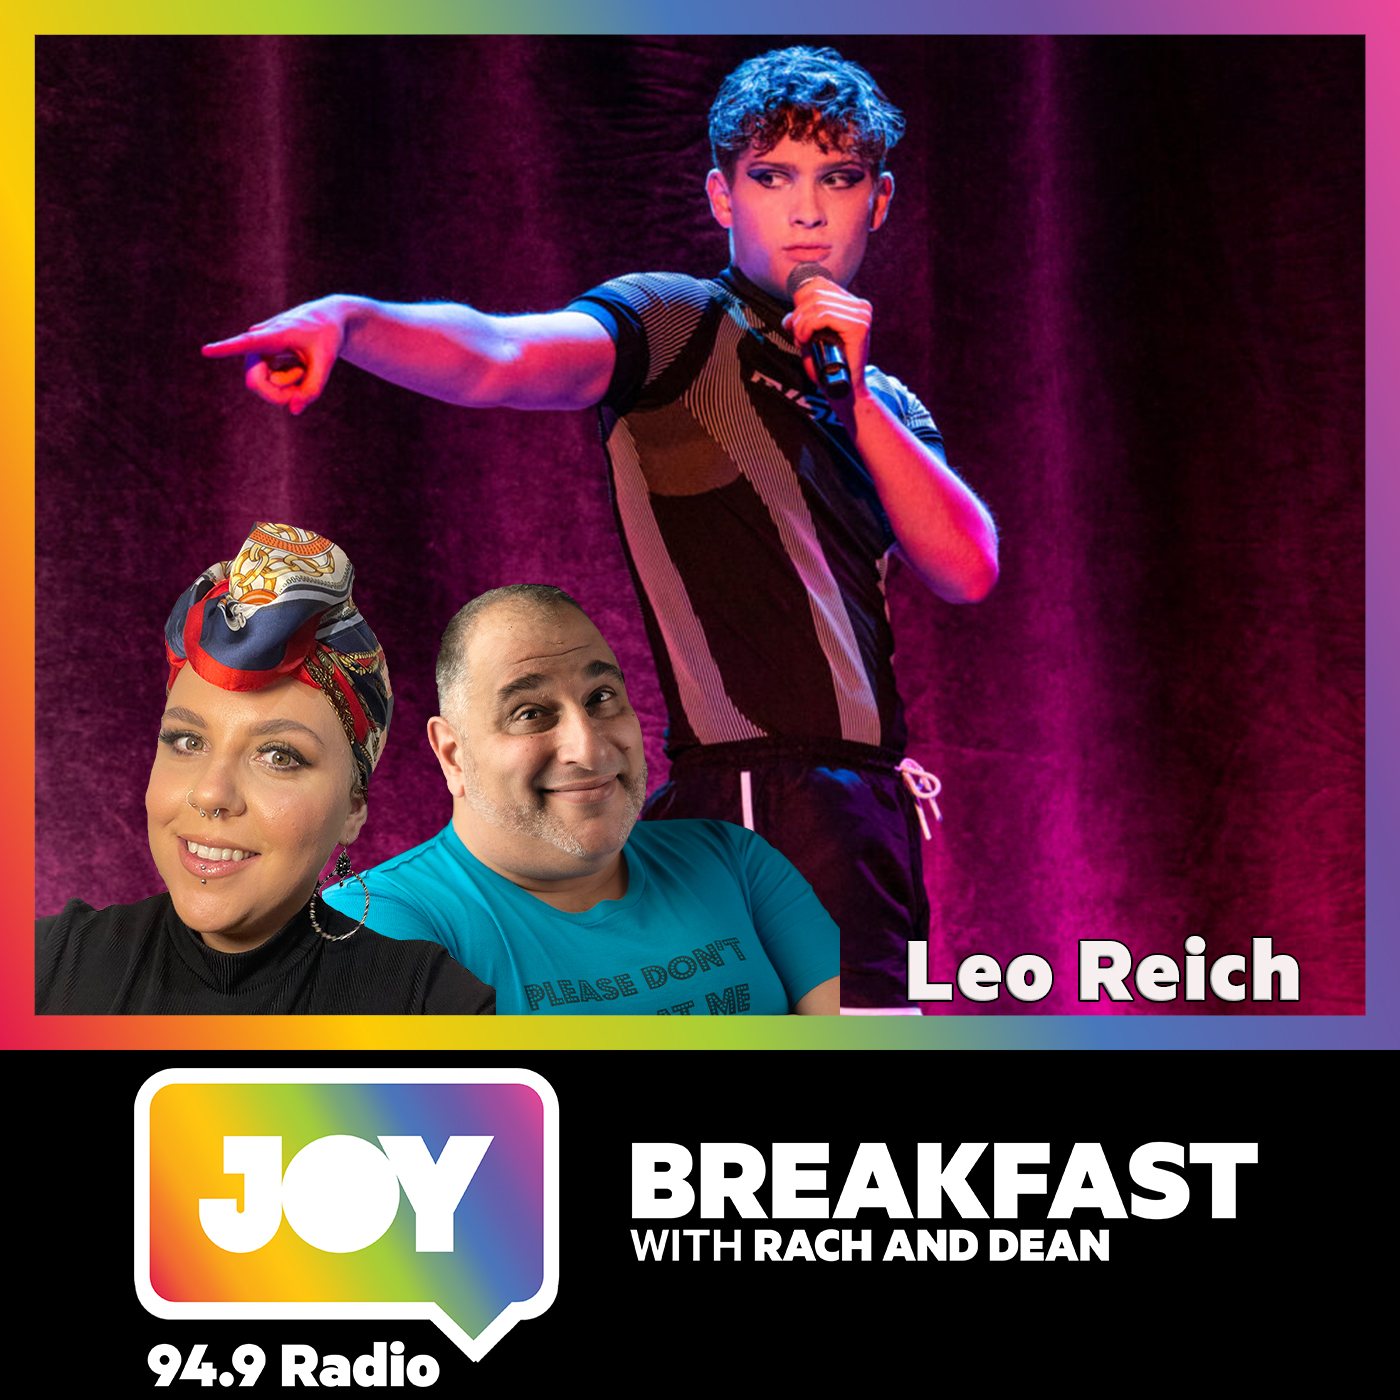 ‘Literally’ laugh out loud with Leo Reich